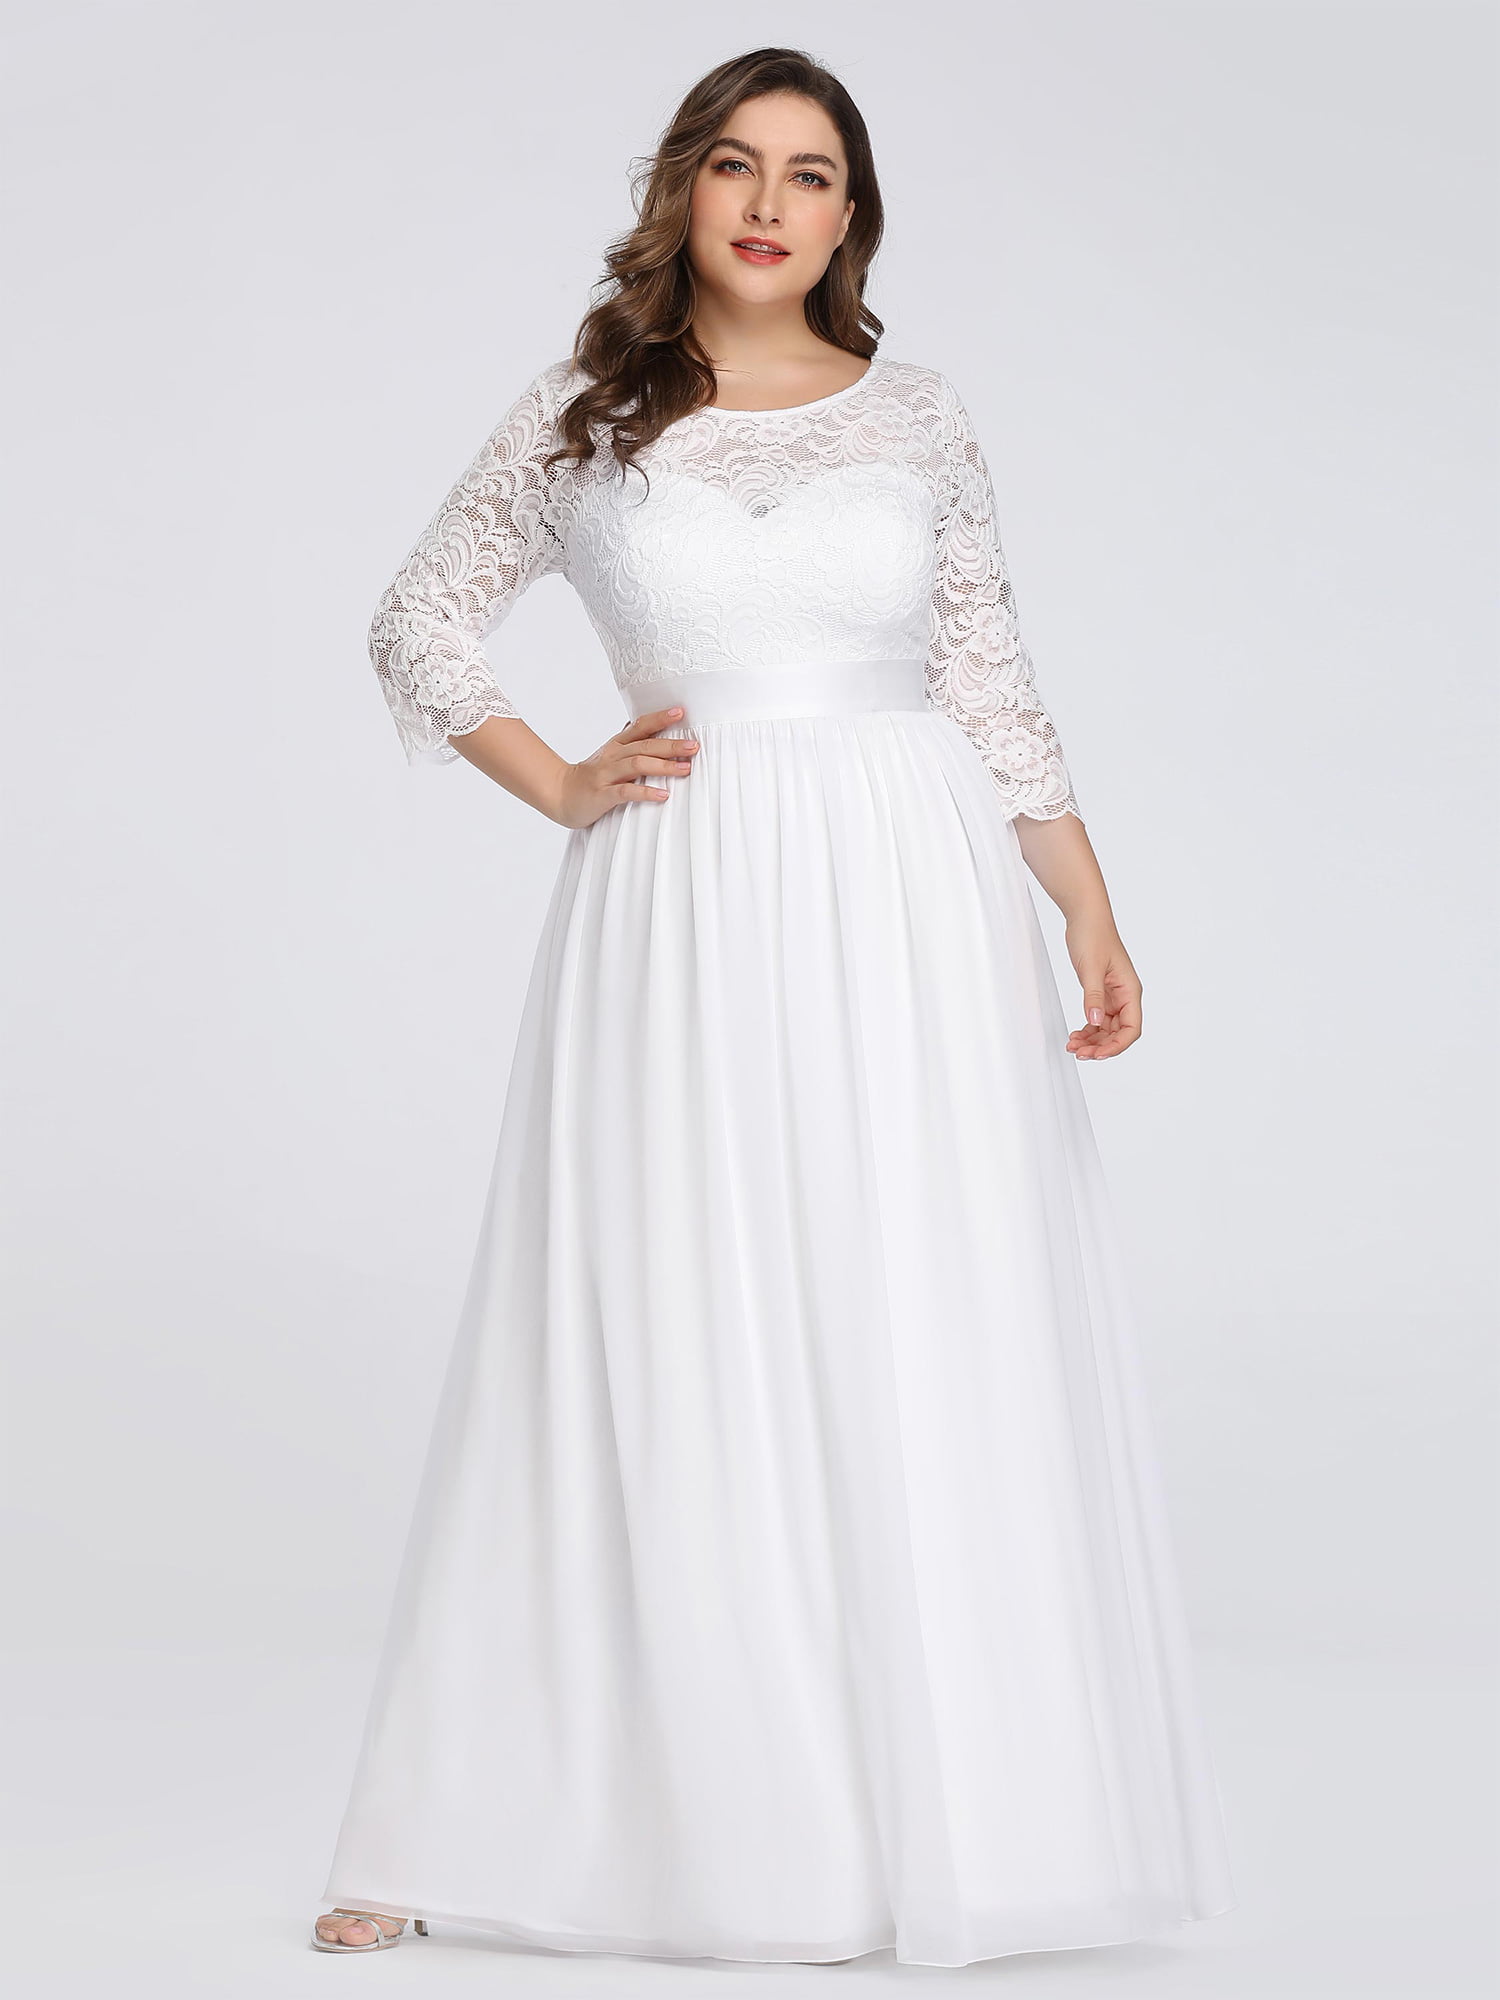 Ever-Pretty Women's Plus Size A-Line 3/4 Lace Sleeves Chiffon Long Formal Evening Party Maxi Dress 7412PZ